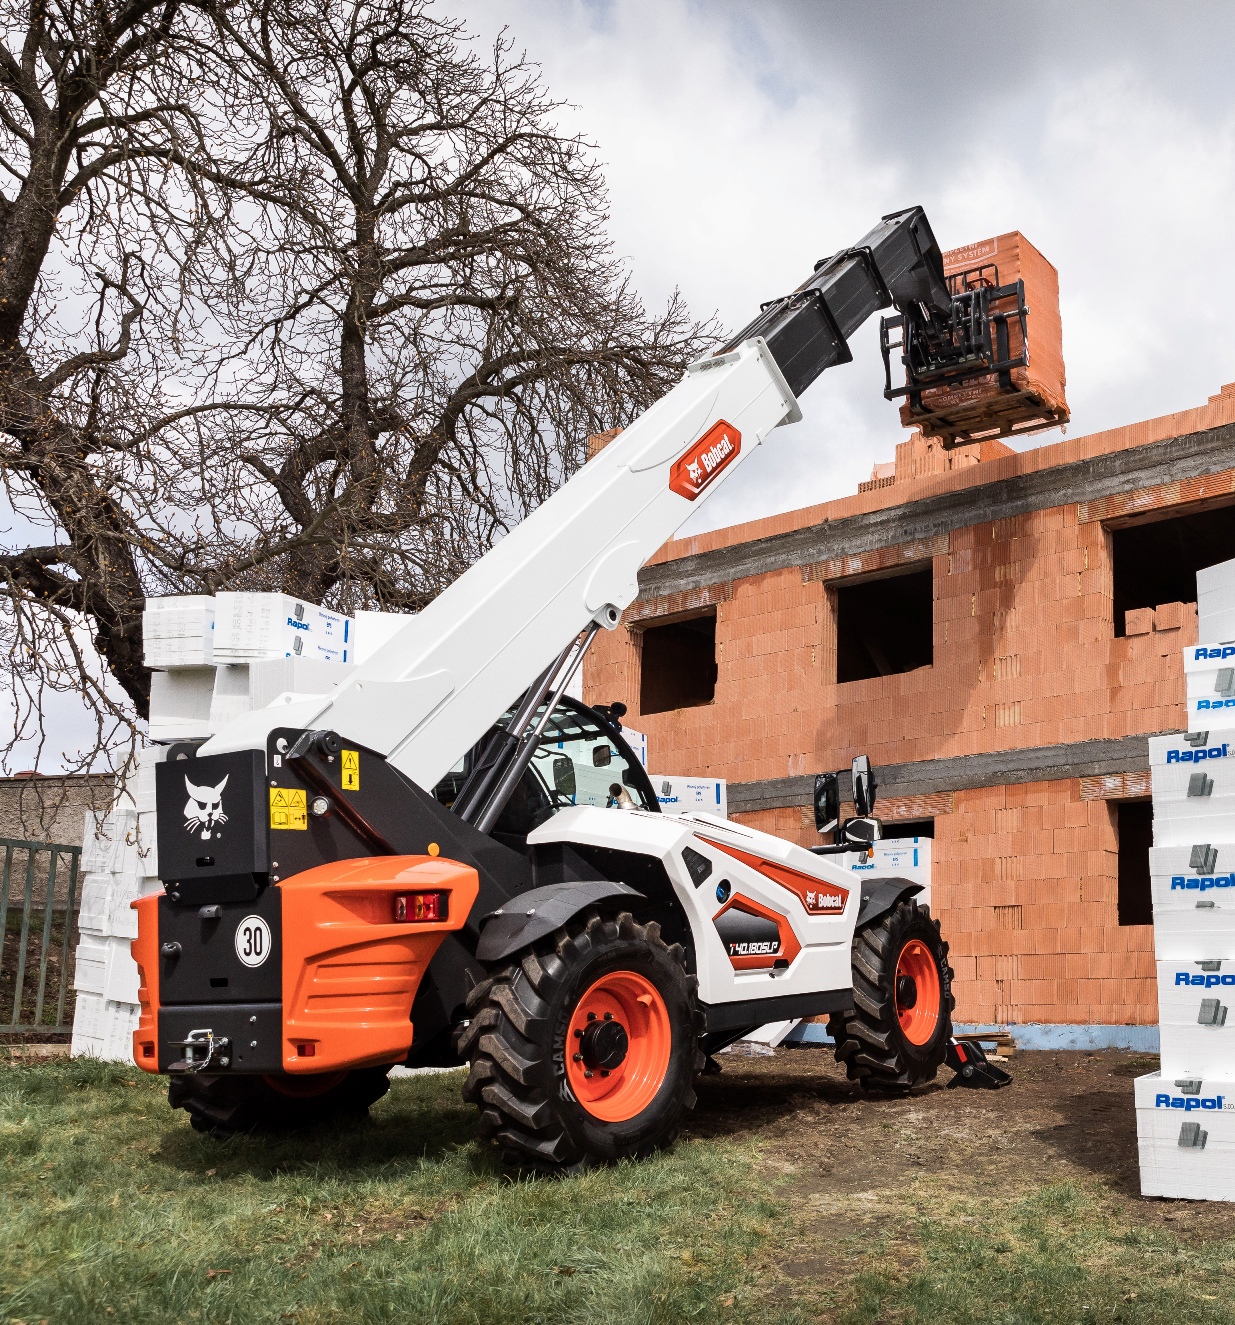 Bobcat takes centre stage on Balgownie stand at ScotPlant